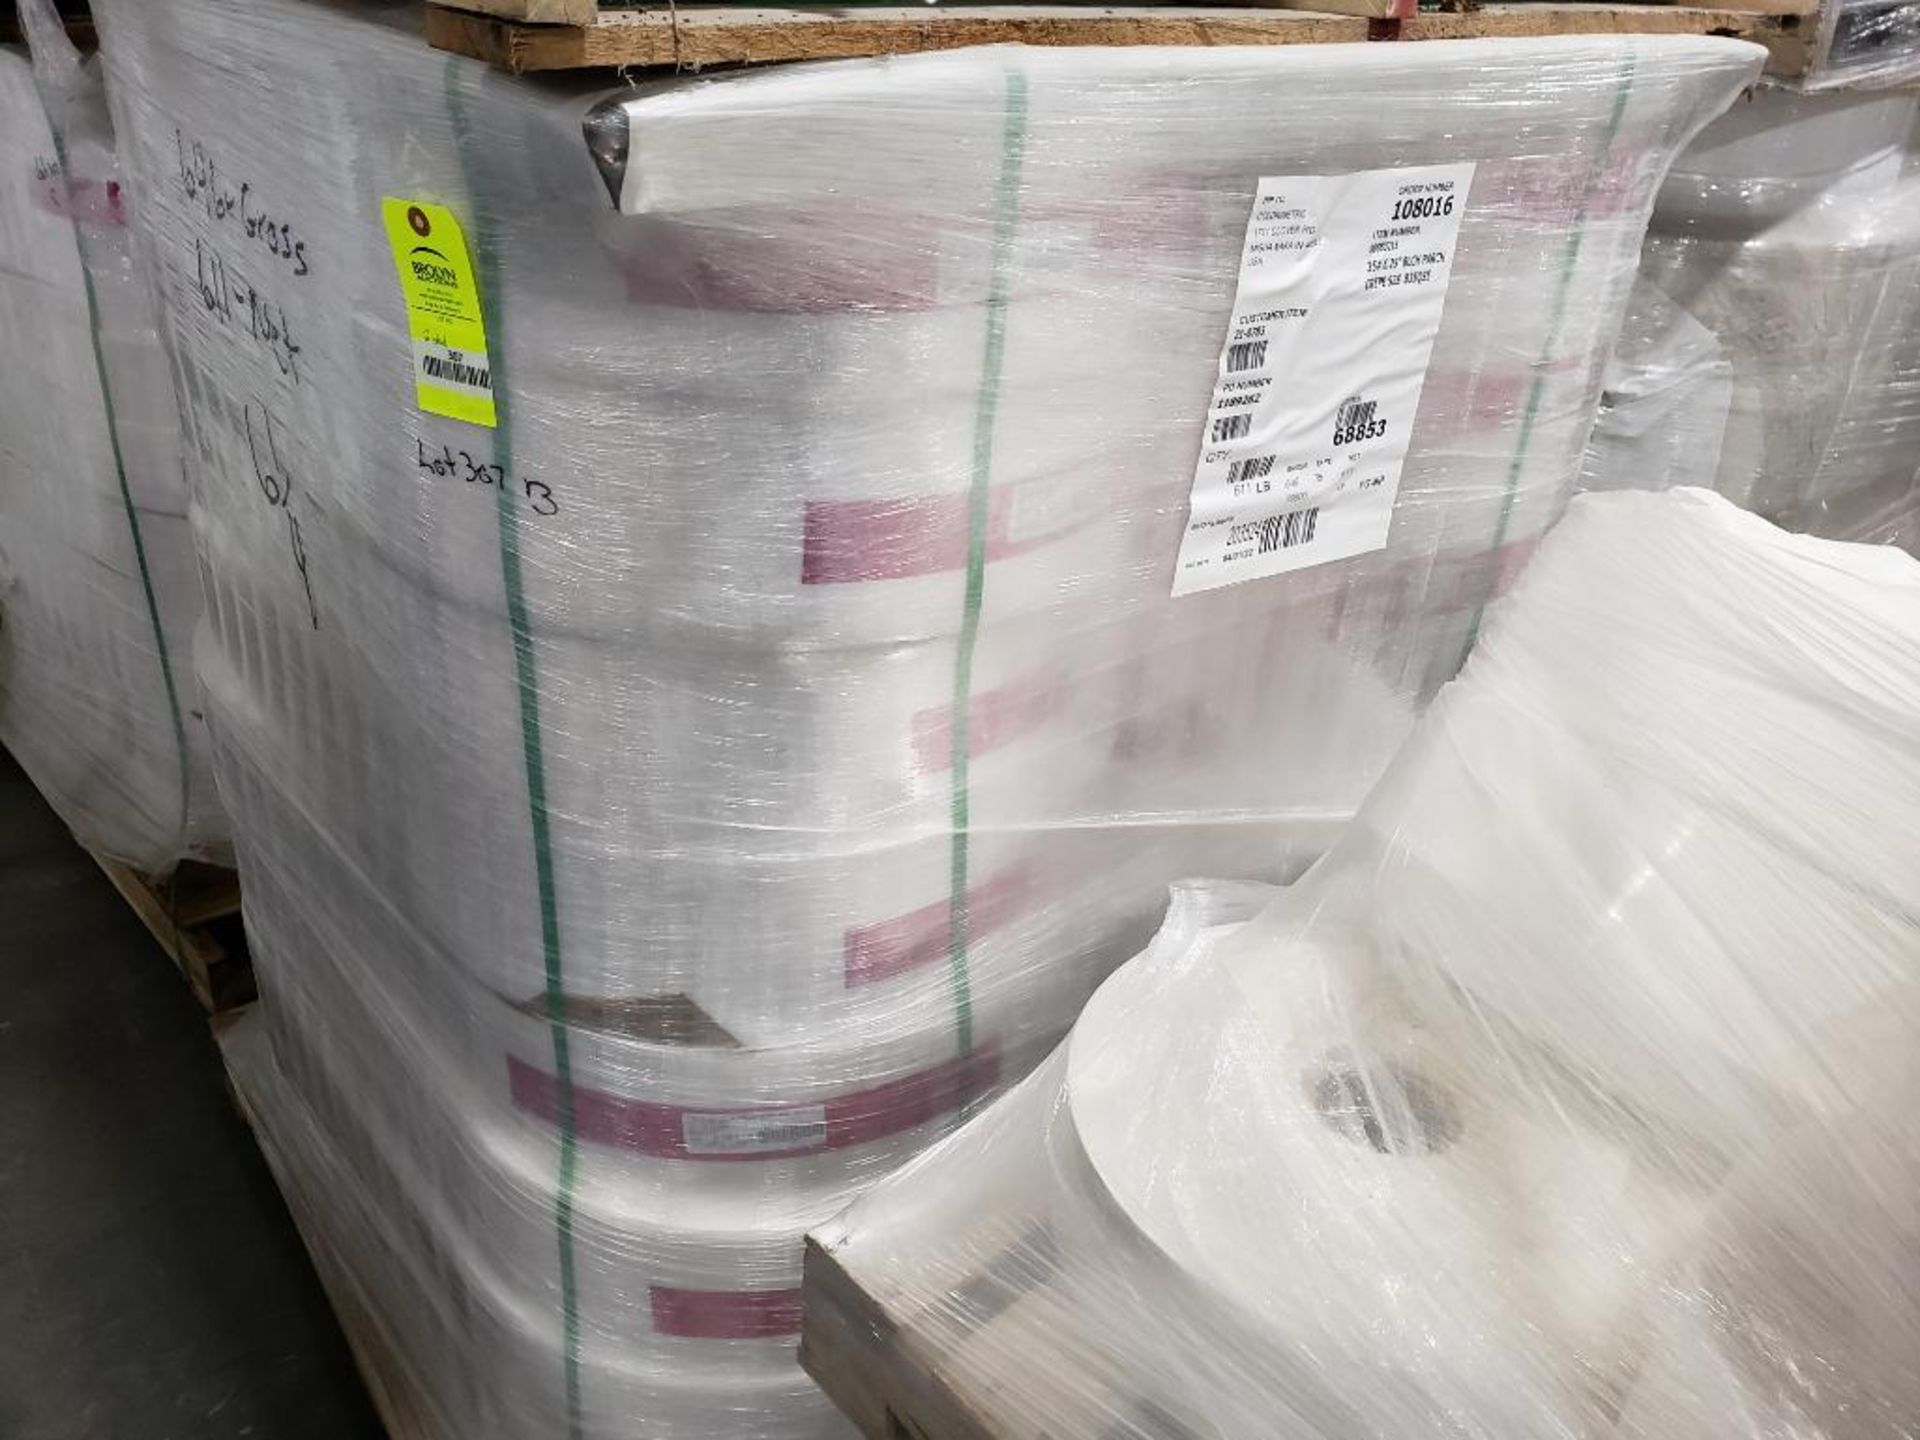 Qty 2 - Pallets of backer paper. Large qty of rolls. Could be used for packing material. - Image 3 of 5